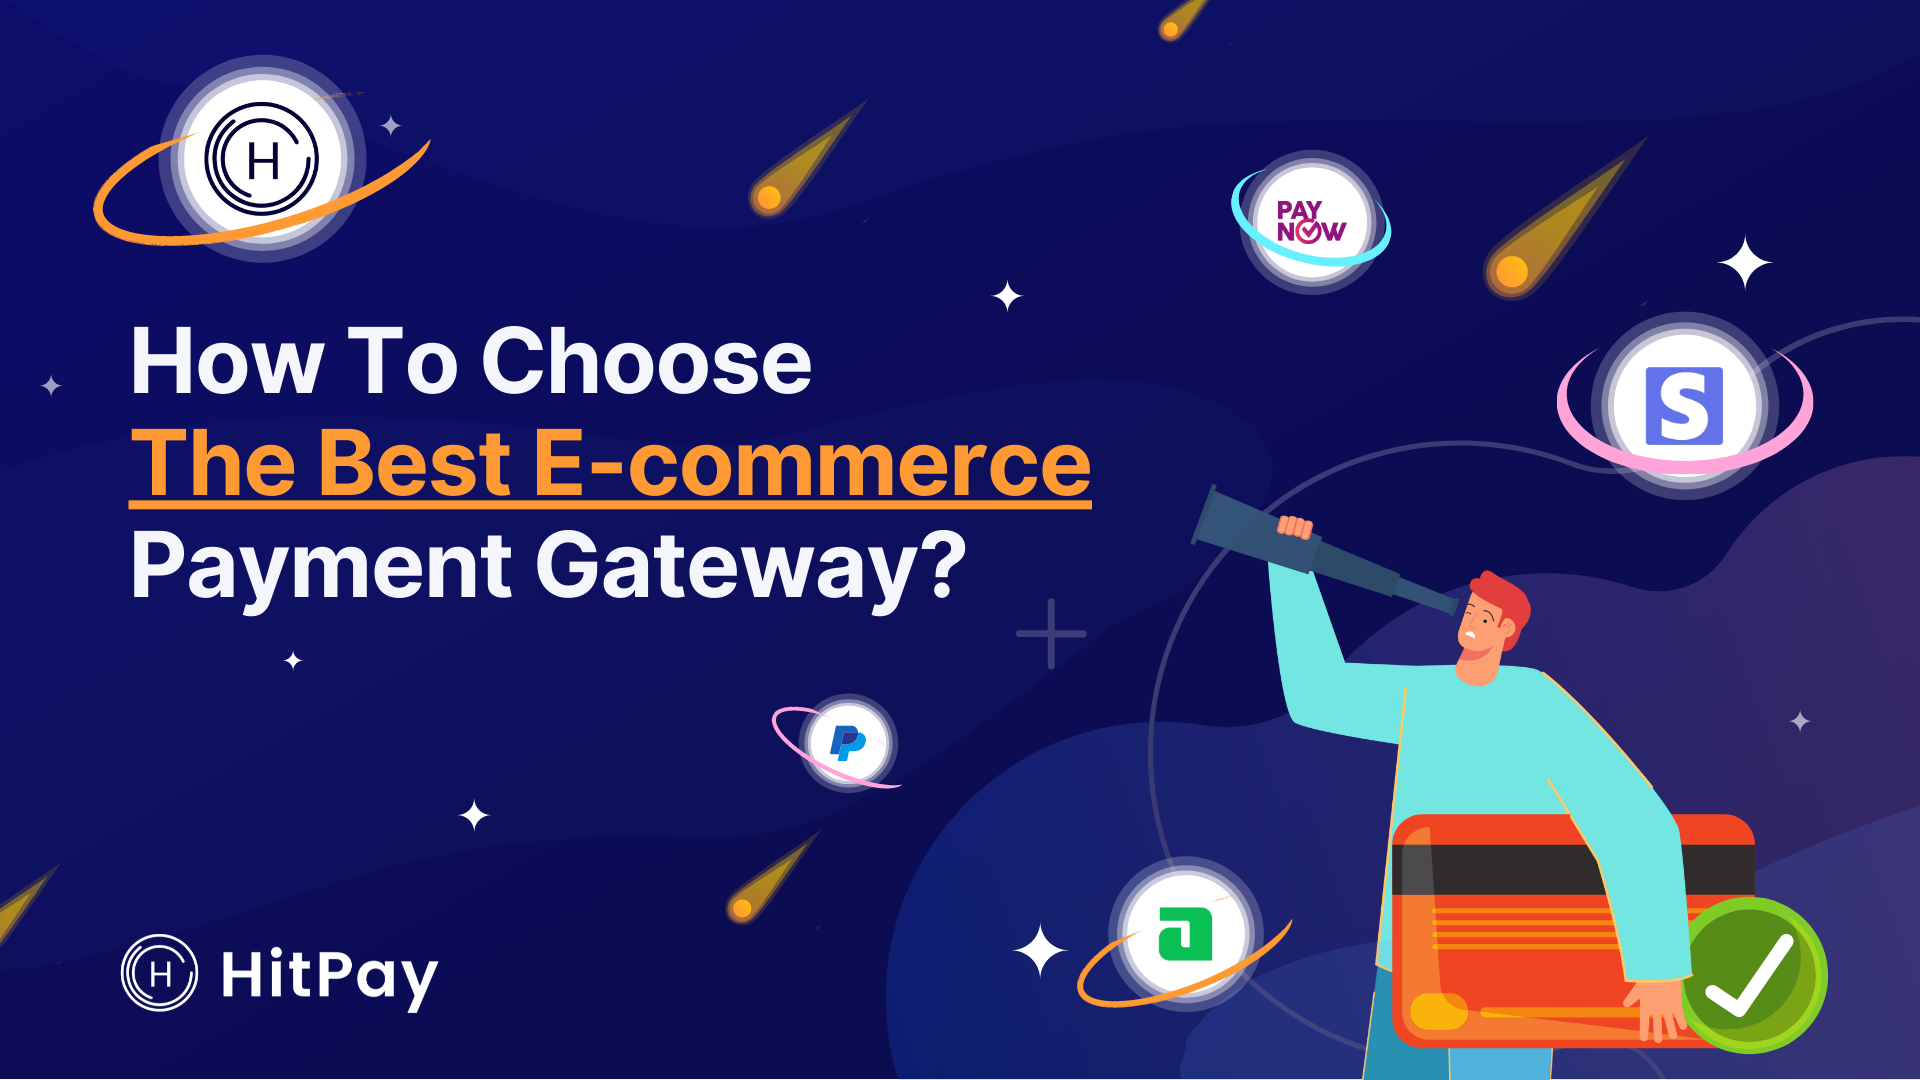 How to easily choose the best E-commerce Payment Gateway for your business